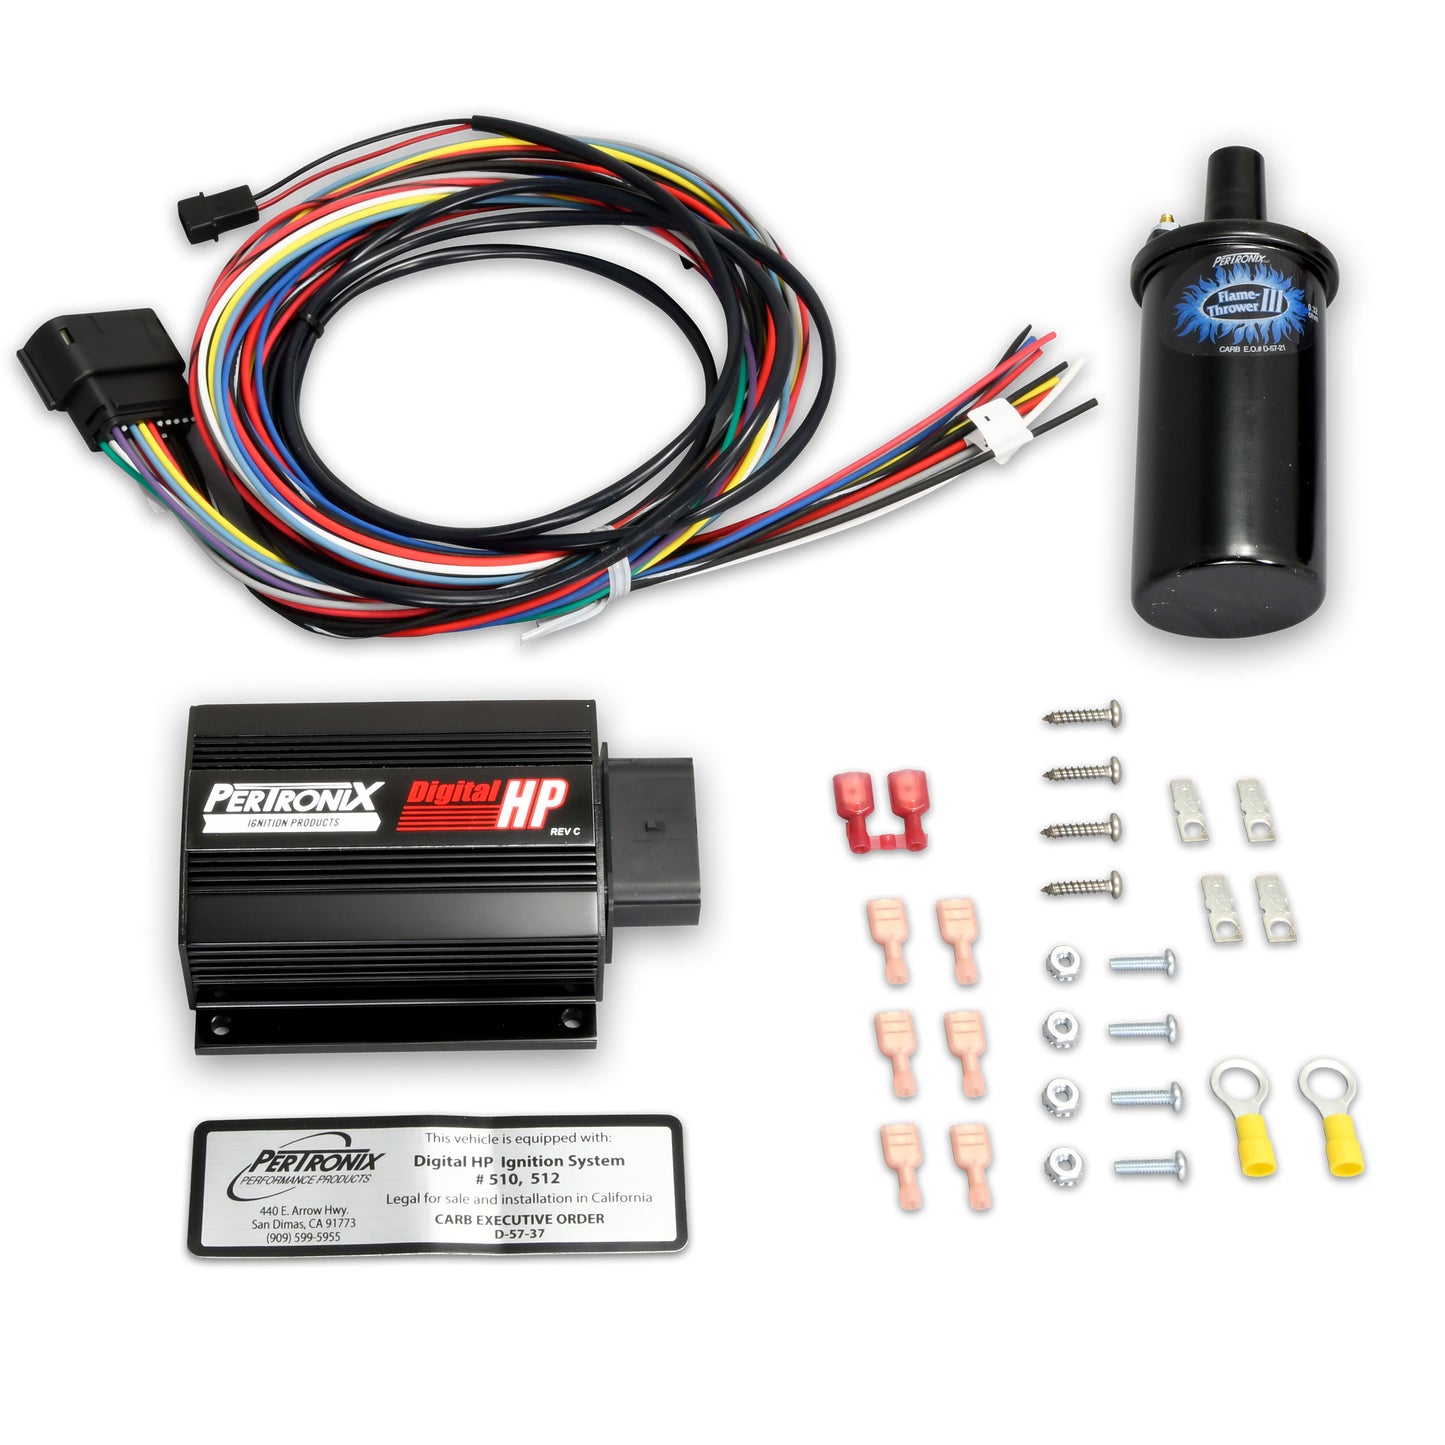 PerTronix 510C Digital HP Ignition Box and Coil Combo